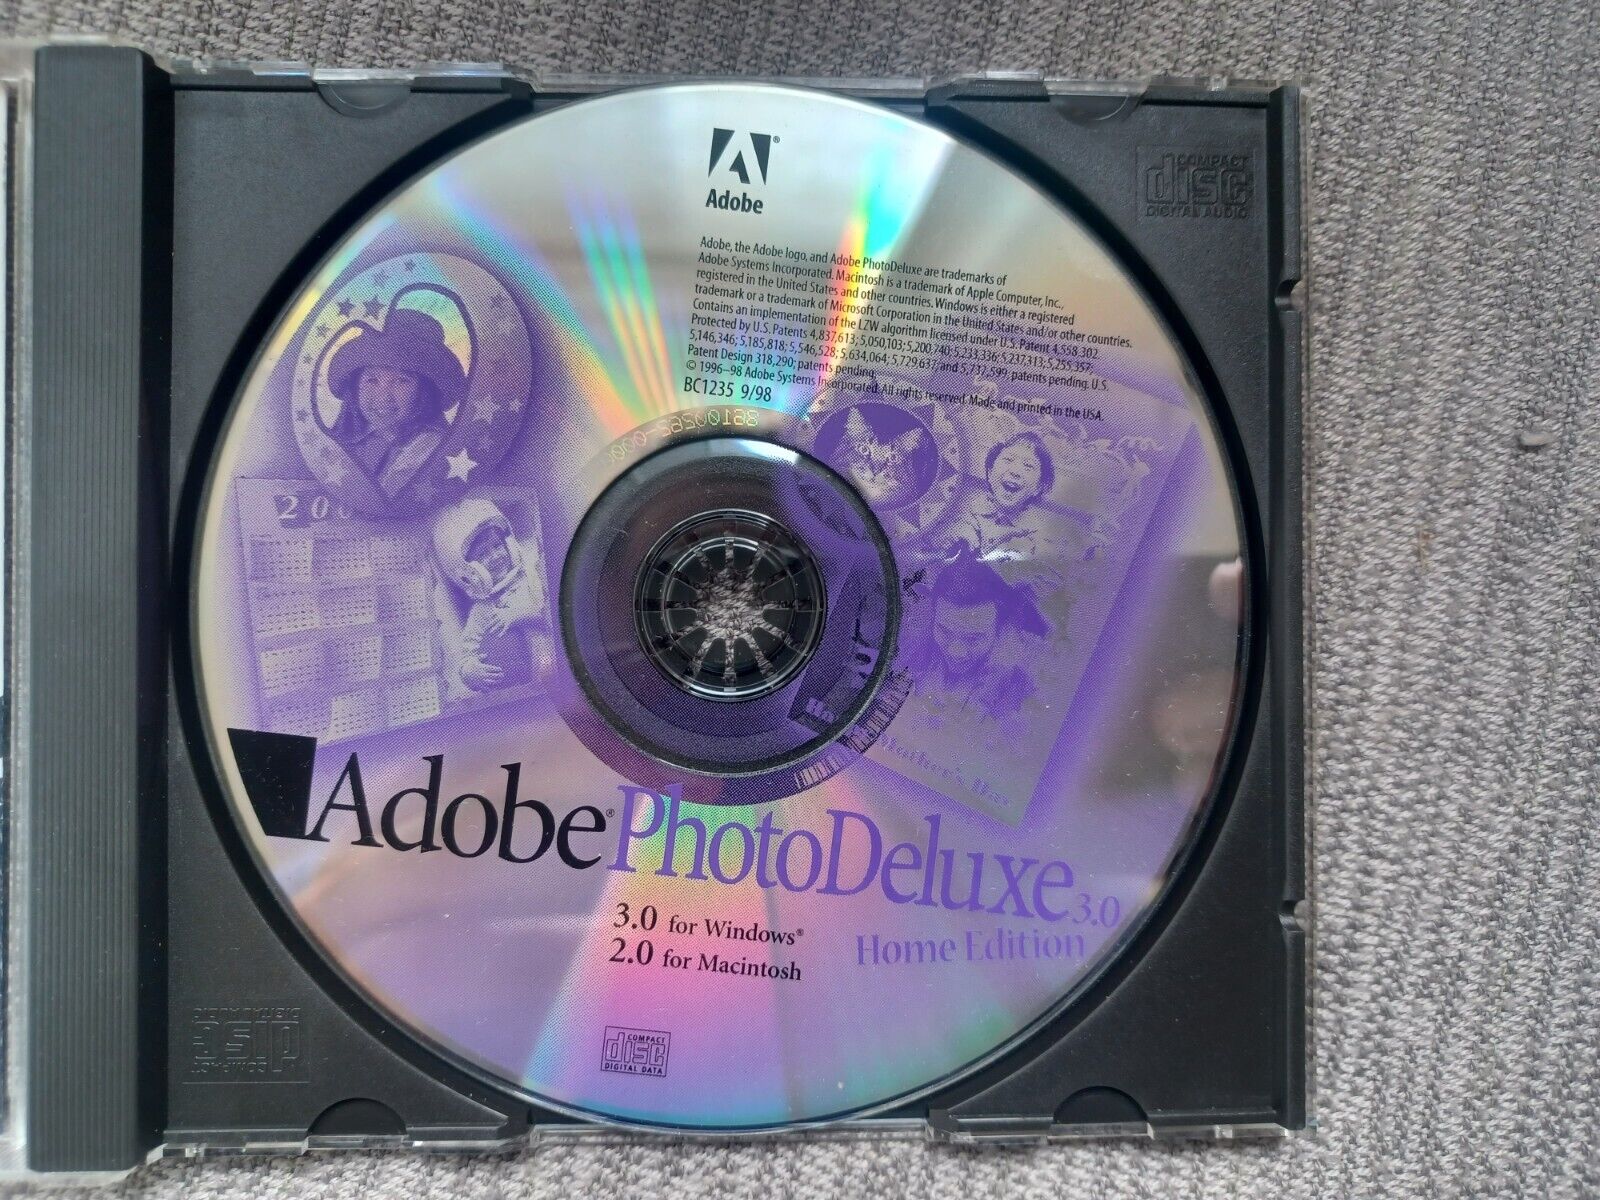 Adobe photoshop 3.0 deluxe Home Edition (PC Mac 2.0 CD-Rom) Disc Only